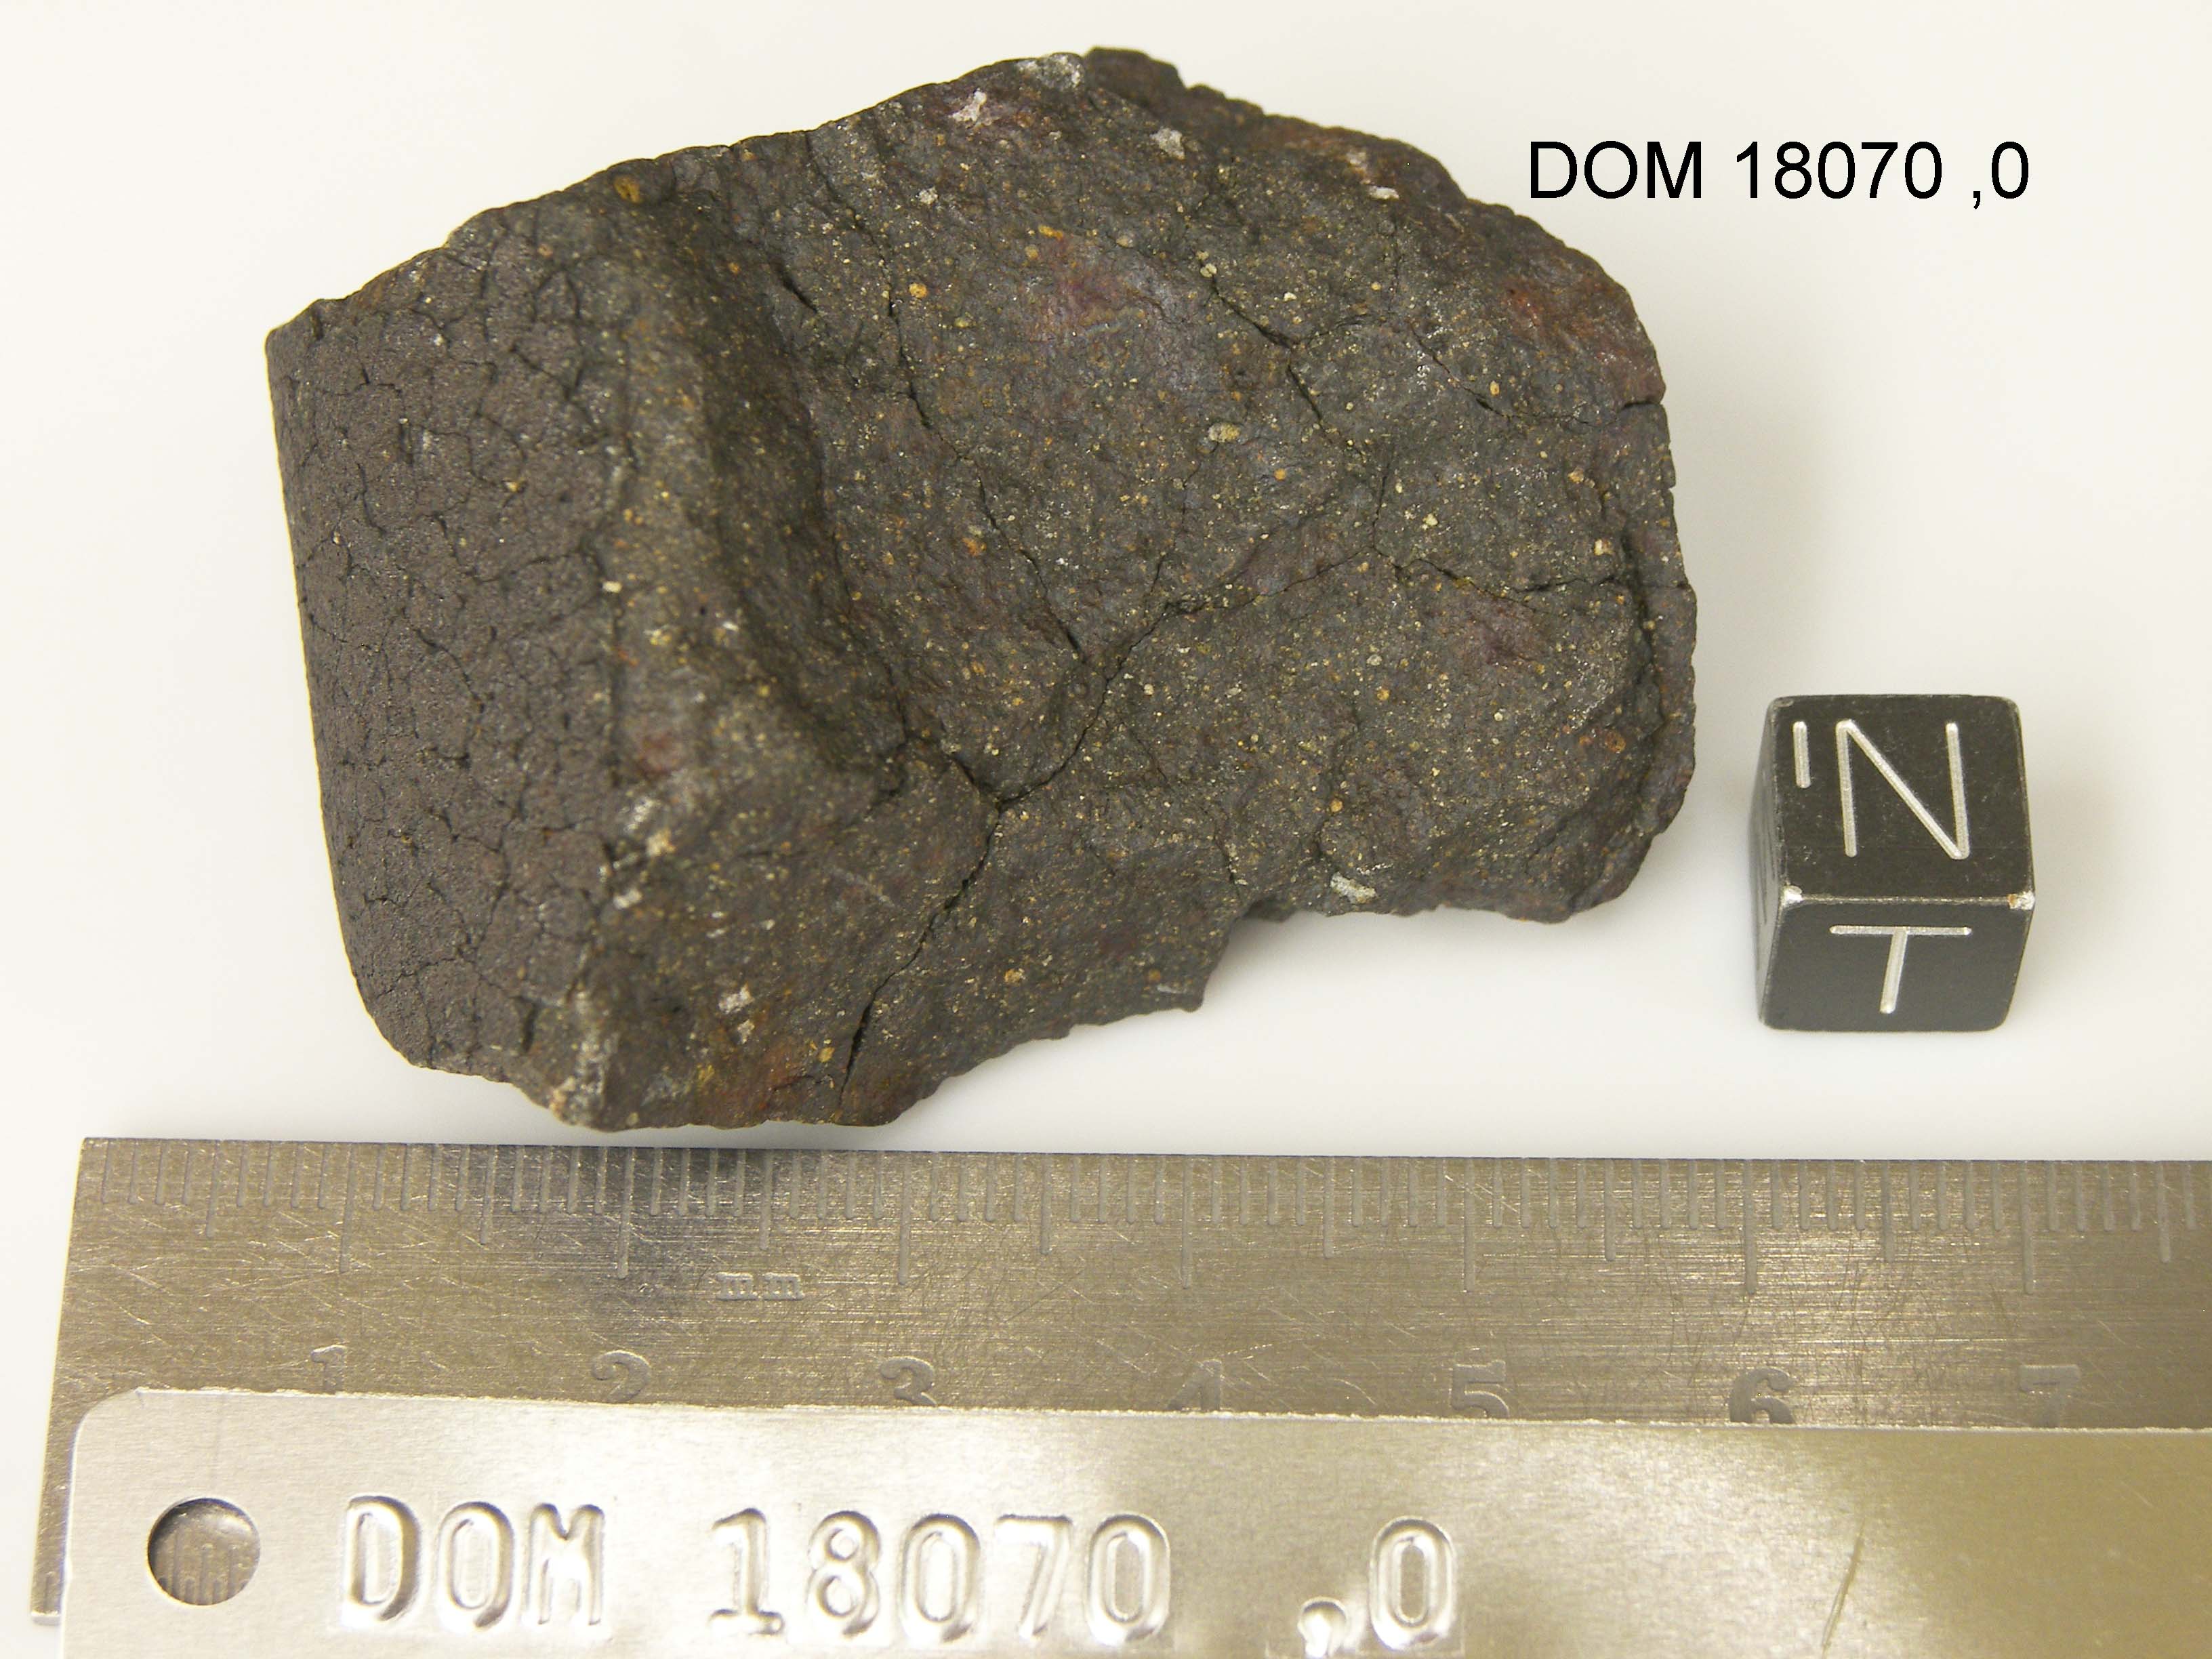 Lab Photo of Sample DOM 18070 Displaying North Top Orientation